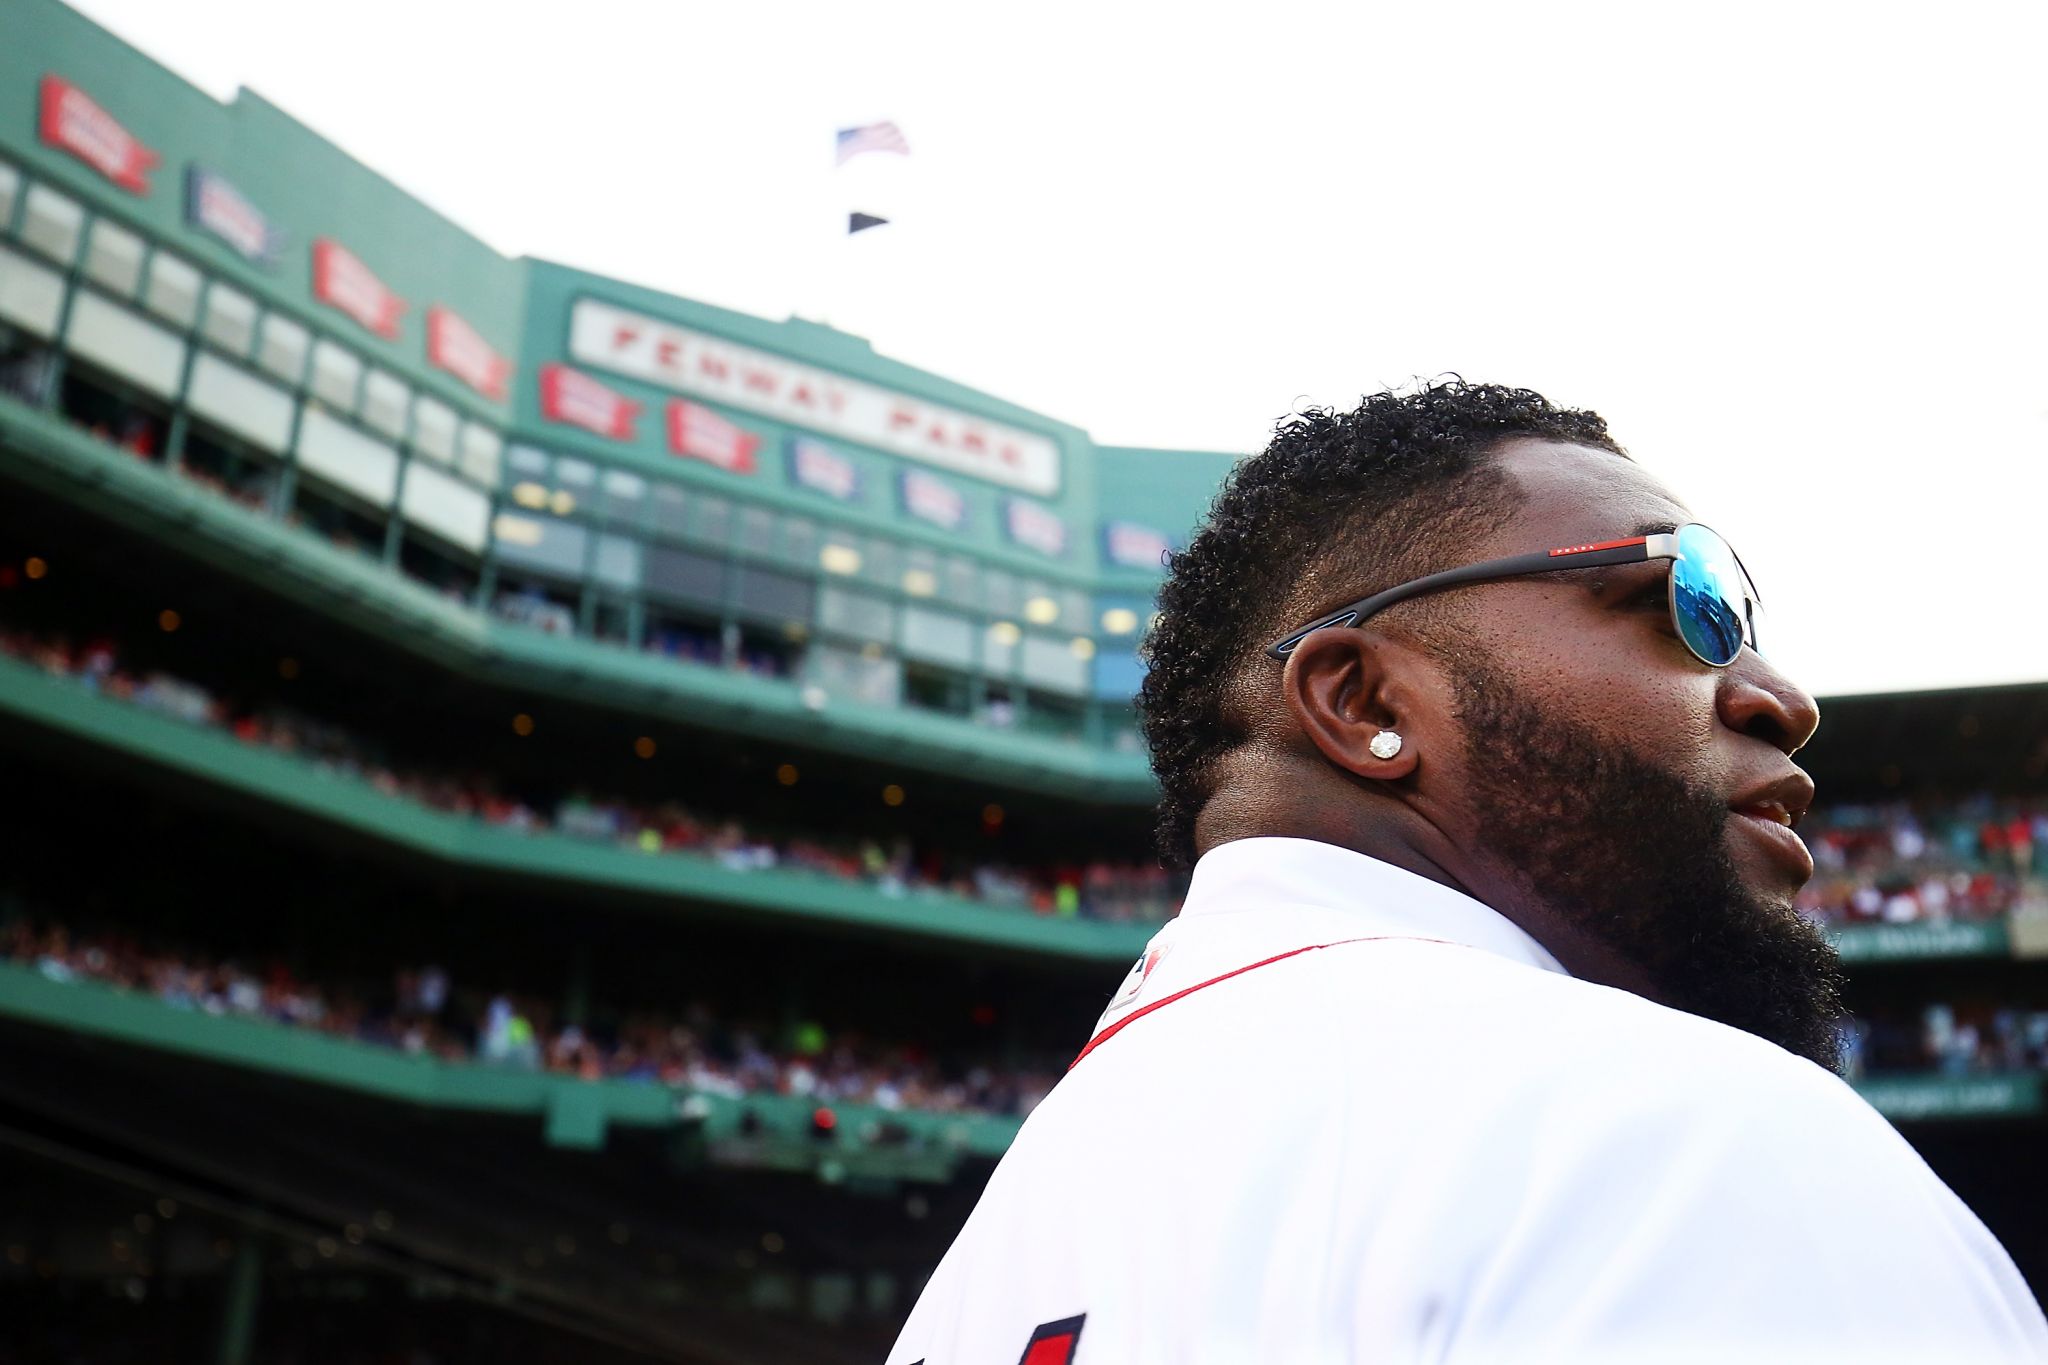 David Ortiz's number 34 to be retired by Boston Red Sox – The Denver Post